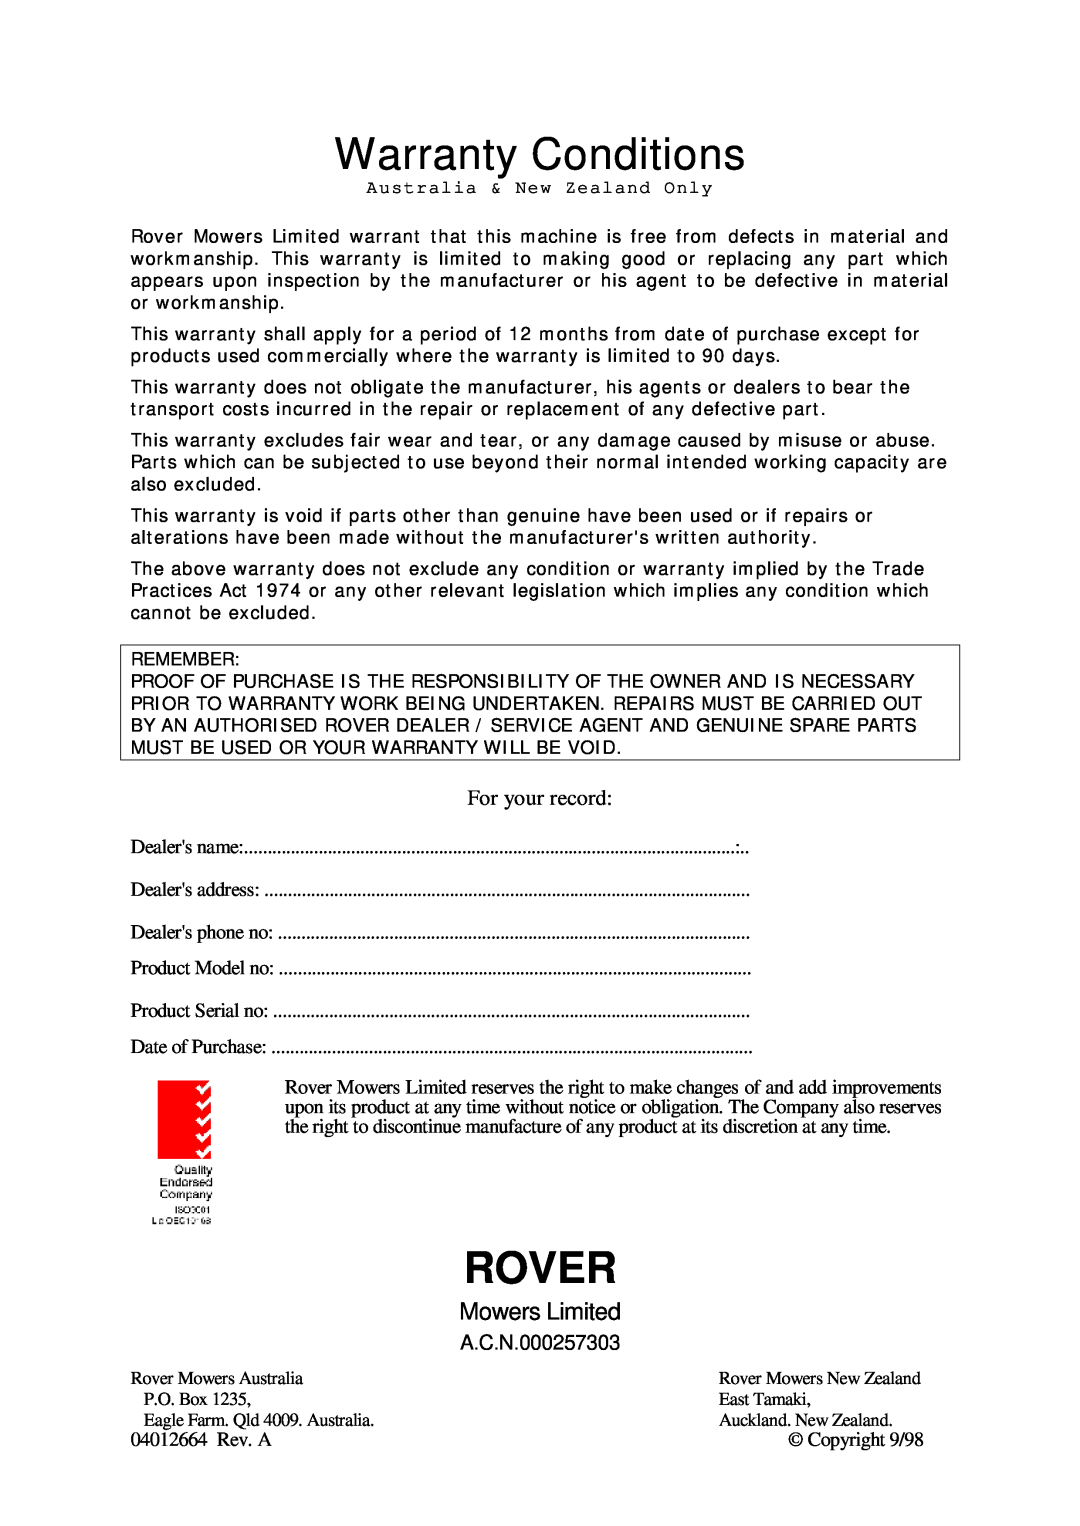 Rover 108, 109 owner manual Warranty Conditions, Rover, Mowers Limited, A.C.N.000257303, For your record, 04012664 Rev. A 